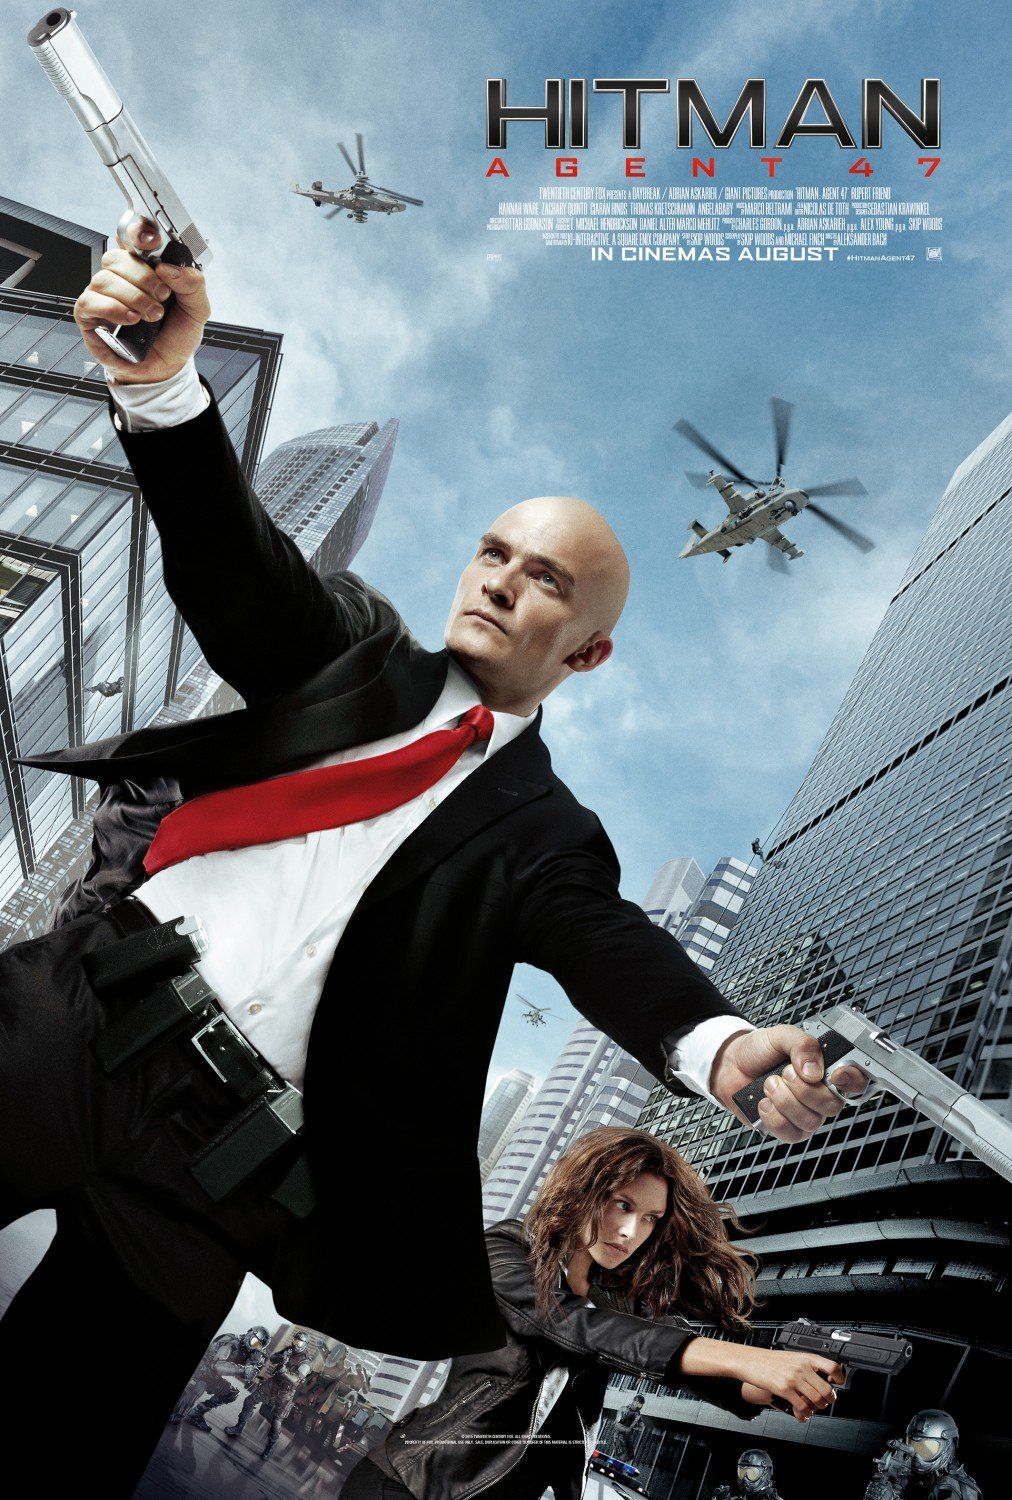 Poster for 'Hitman: Agent 47' featuring stunt and precision driving work by Ferdi Fischer.